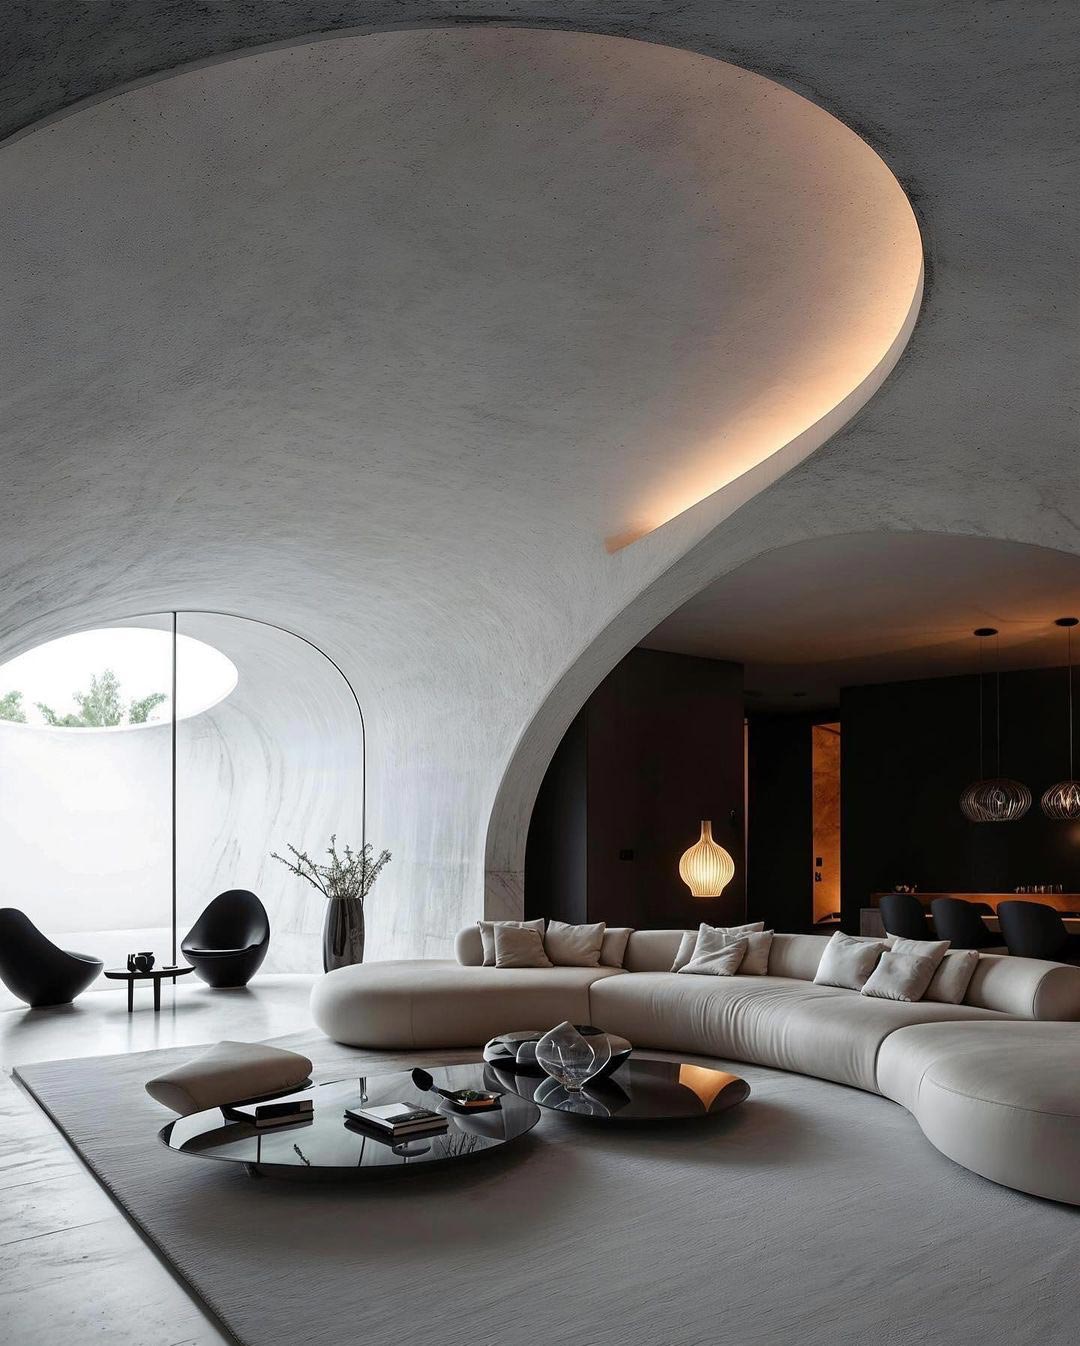 Abstract-Shaped Home Design living room space